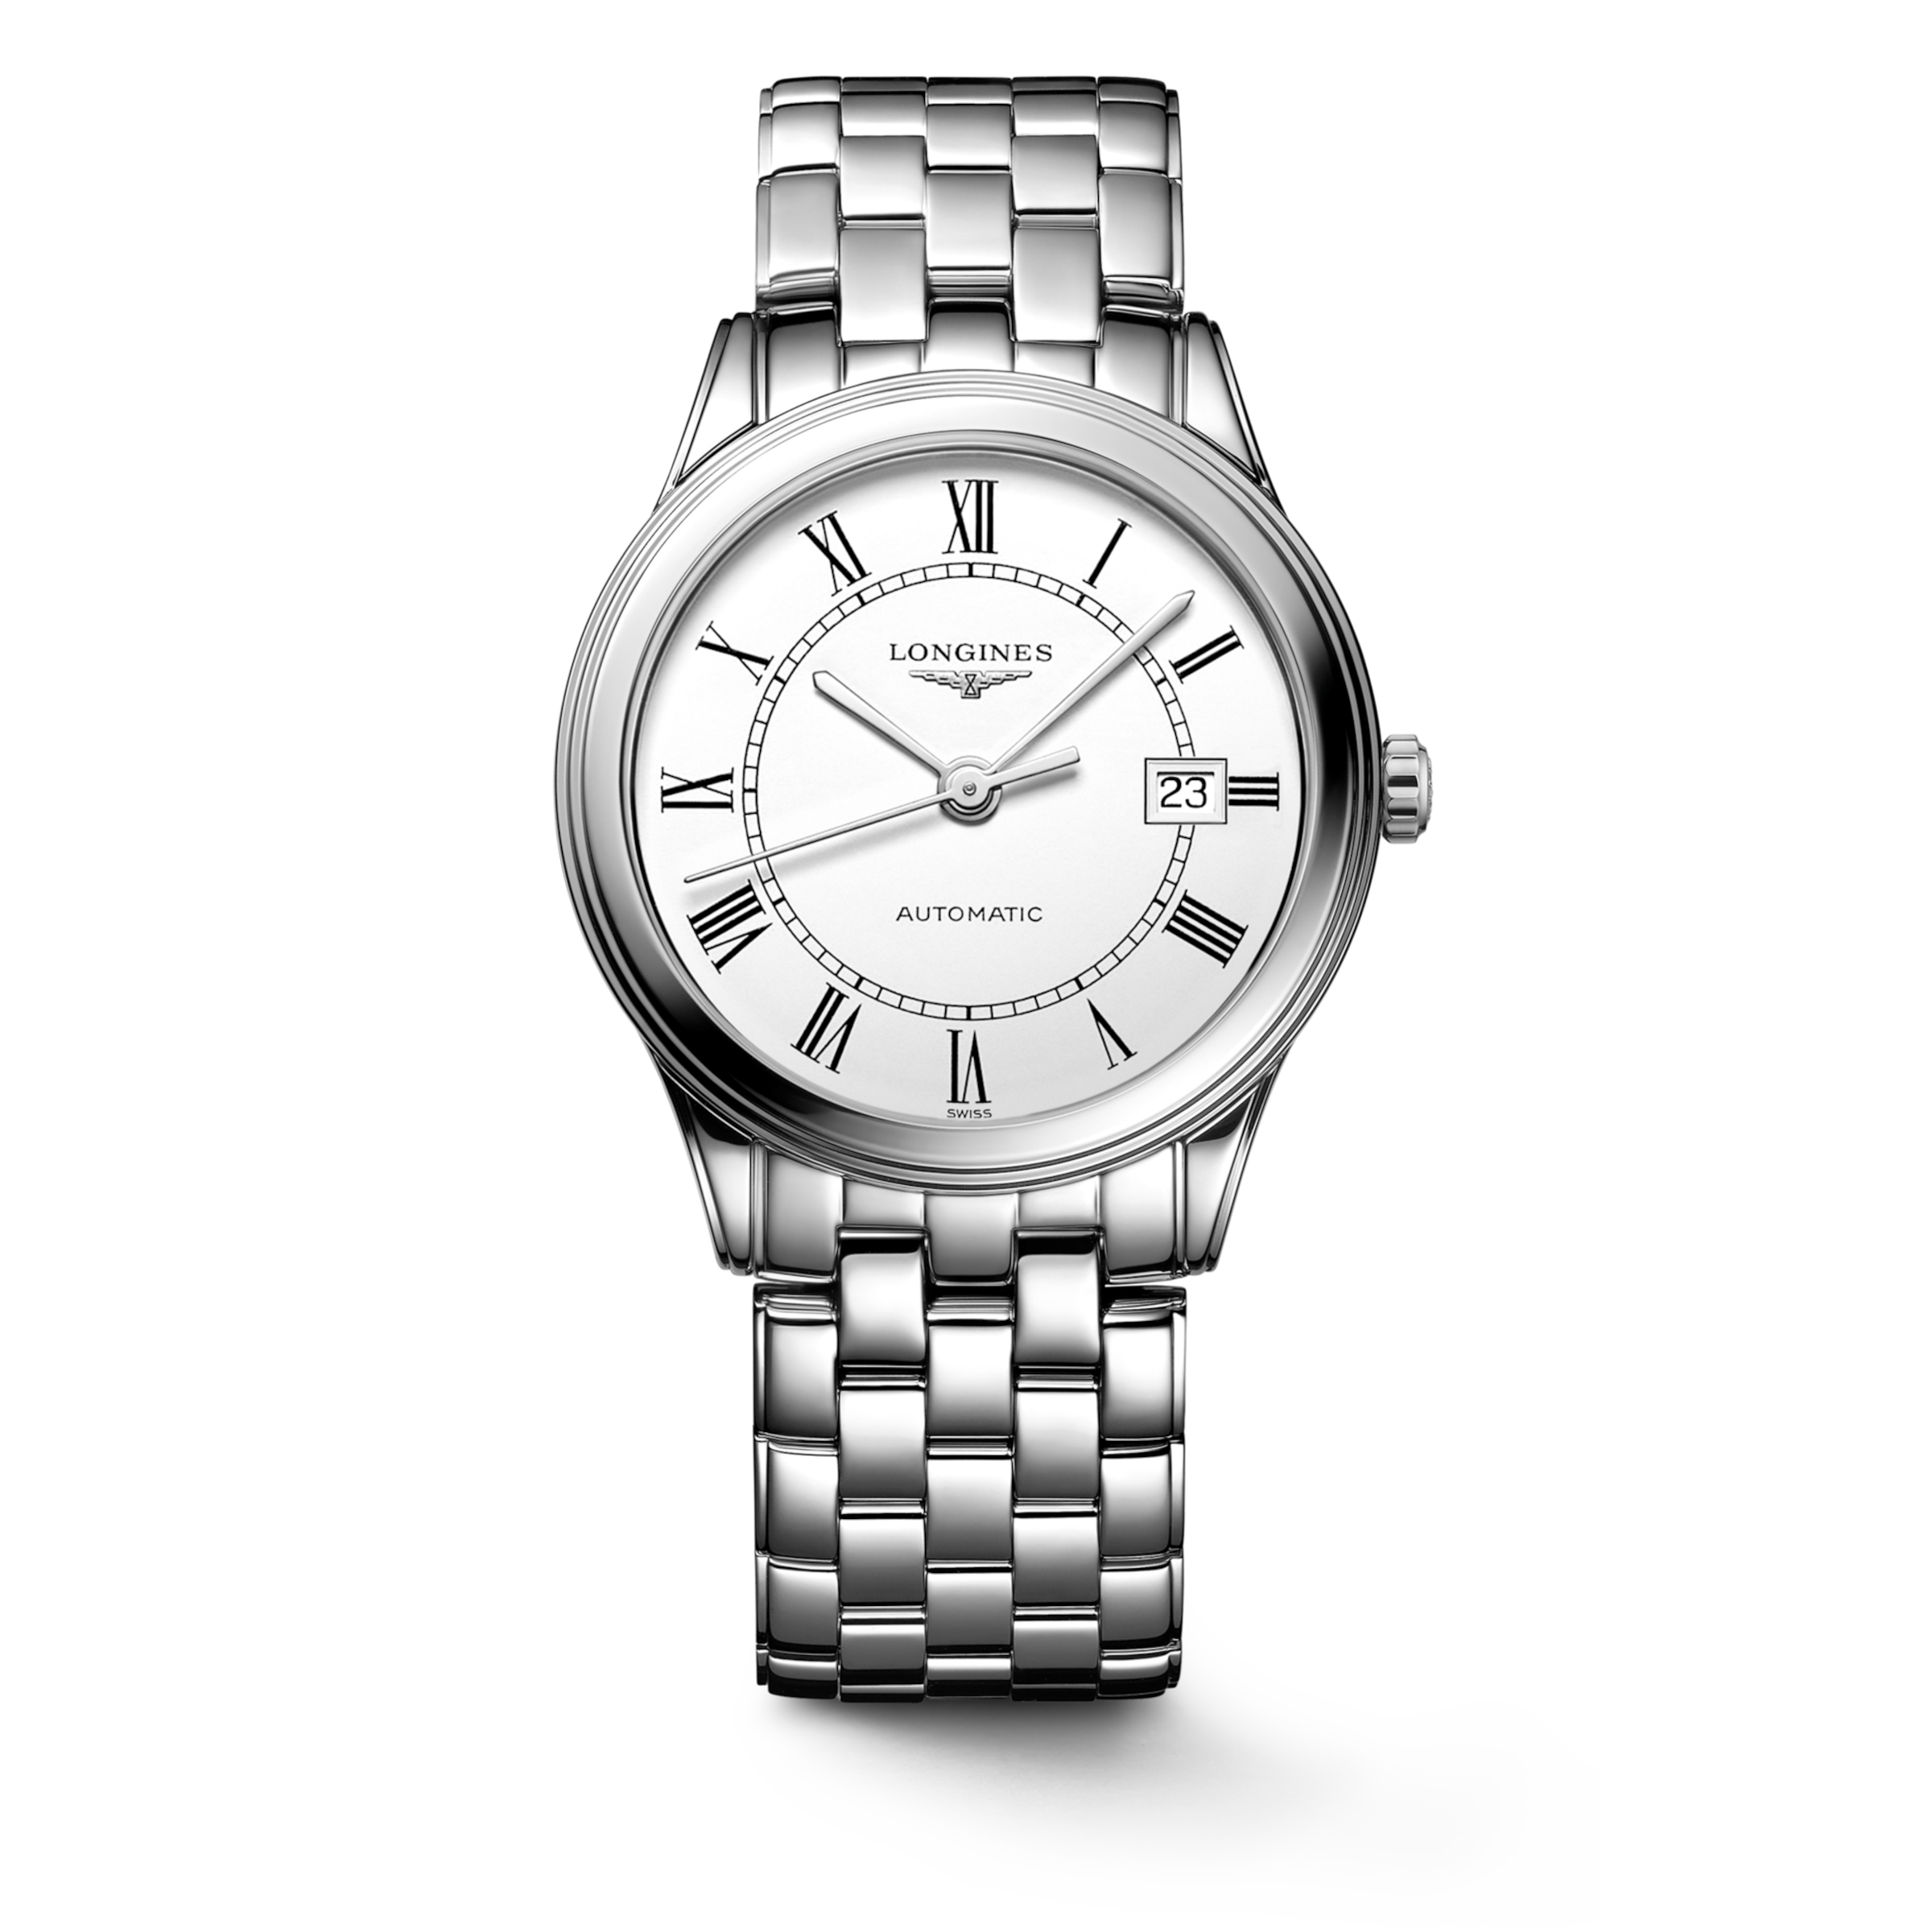 Longines FLAGSHIP Automatic Stainless steel Watch - L4.974.4.21.6